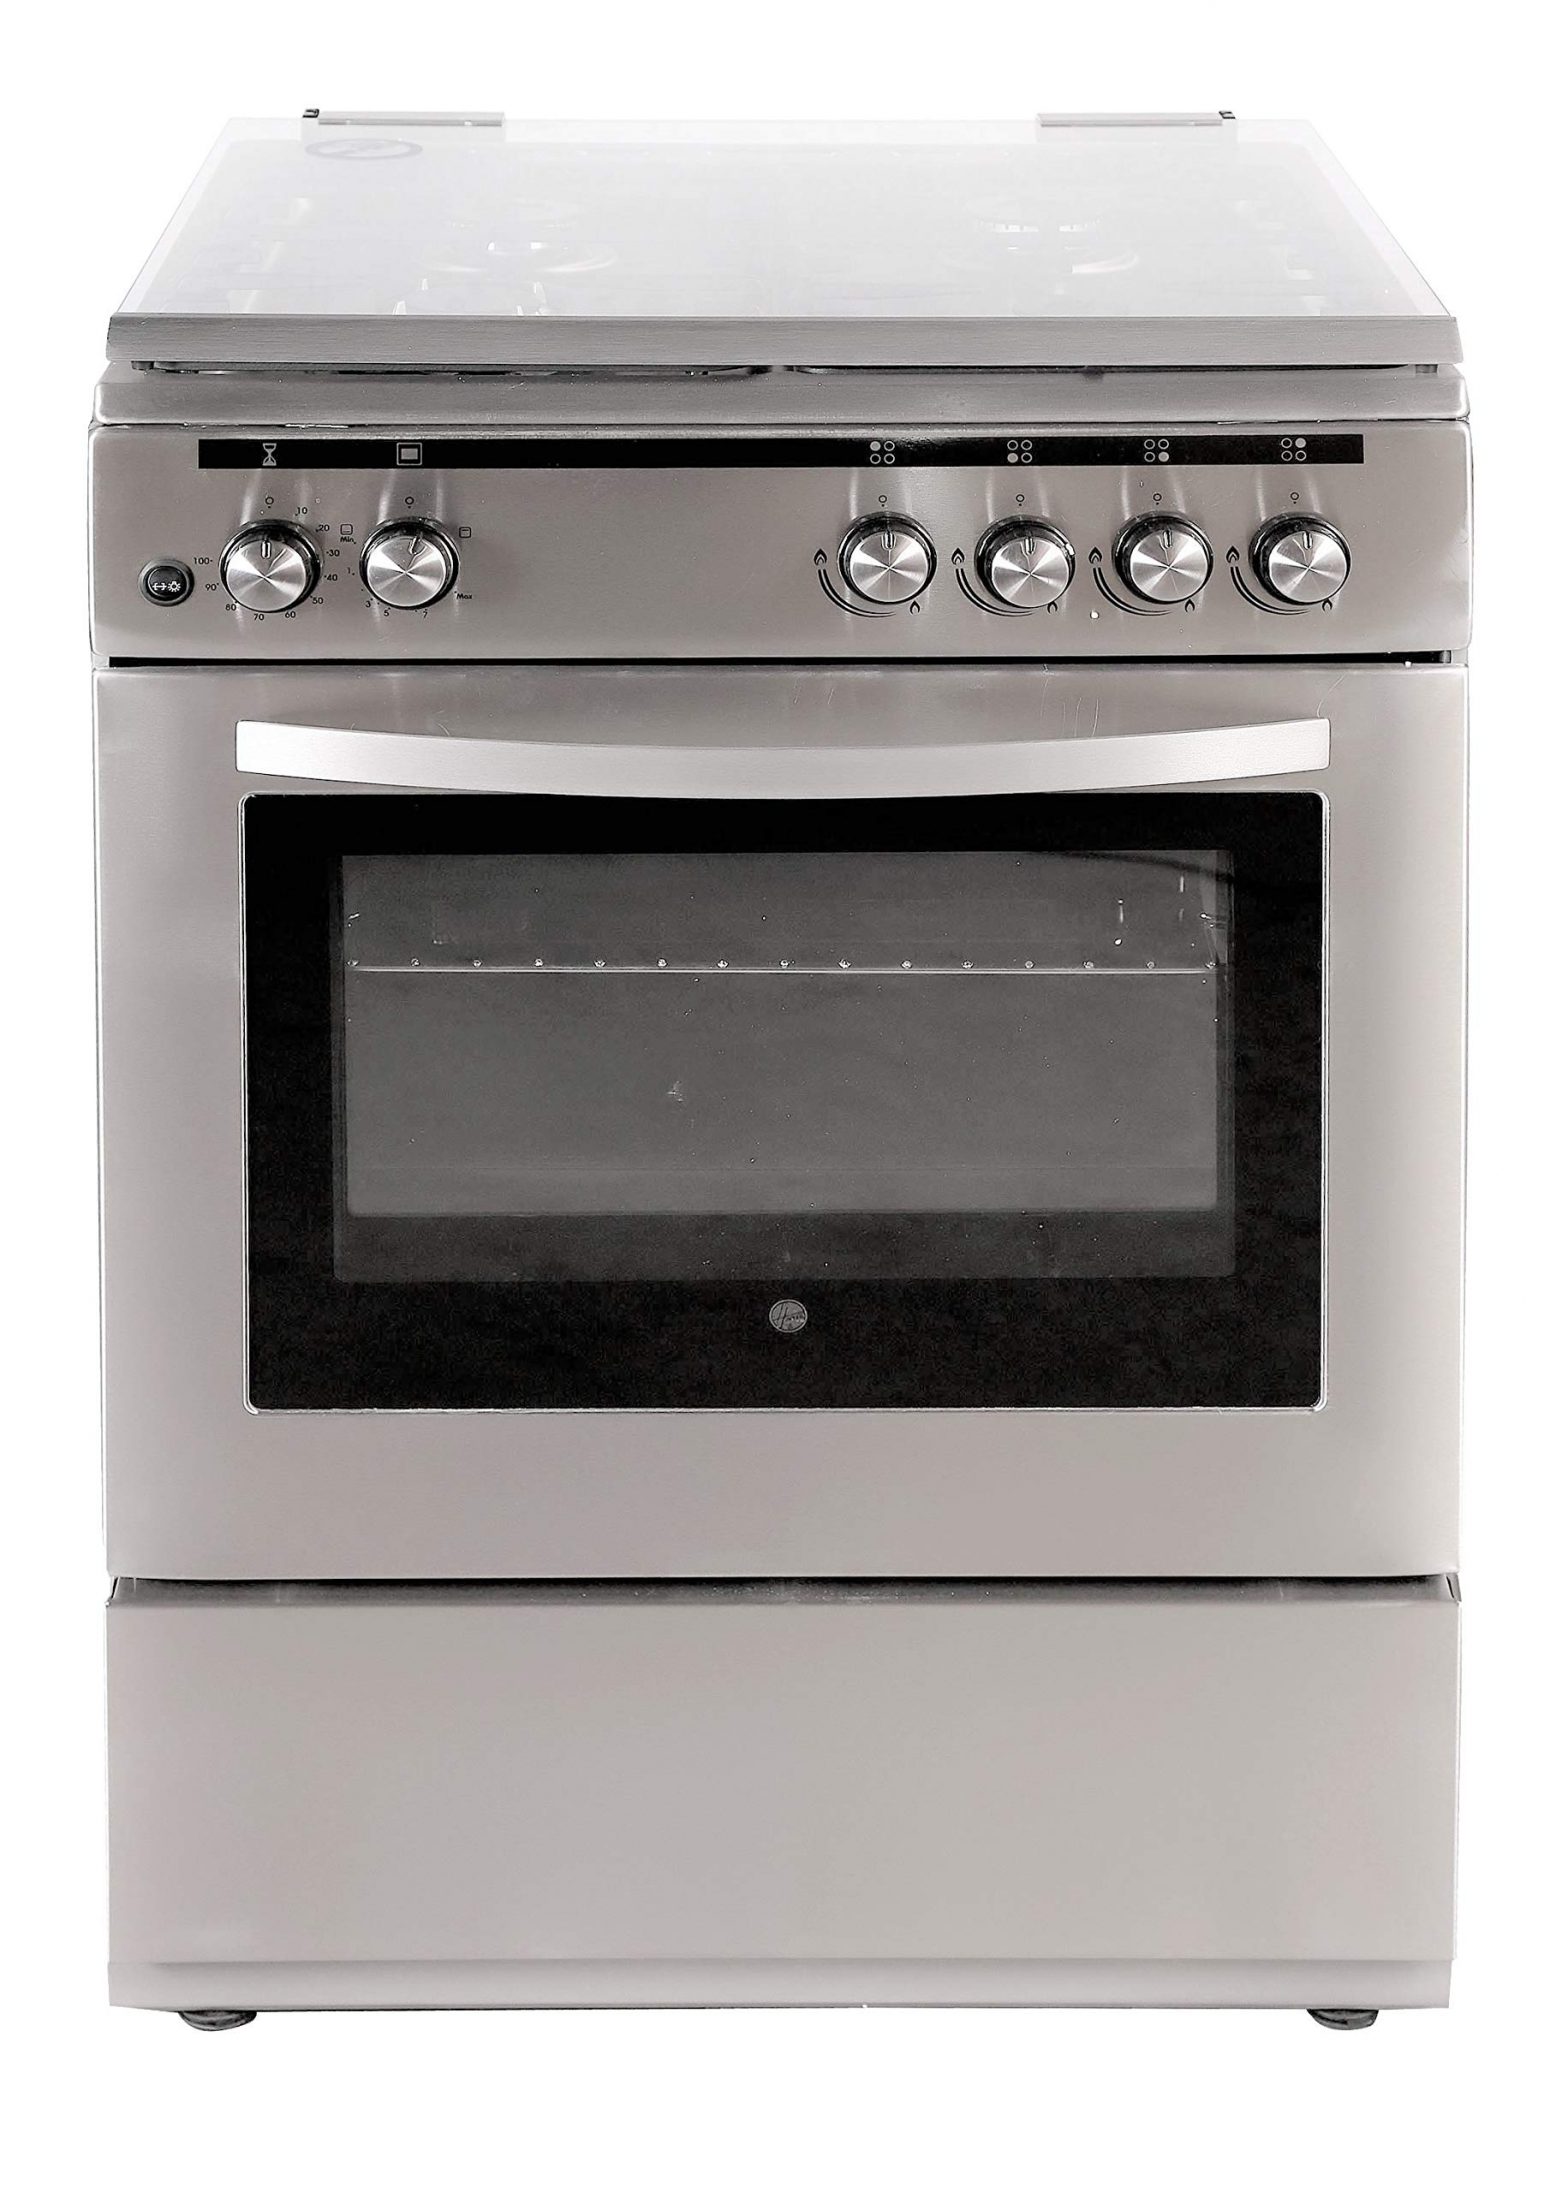 GB Free Standing Oven 50×55 / 50×60 / 60×60 Electrical Oven User Manual